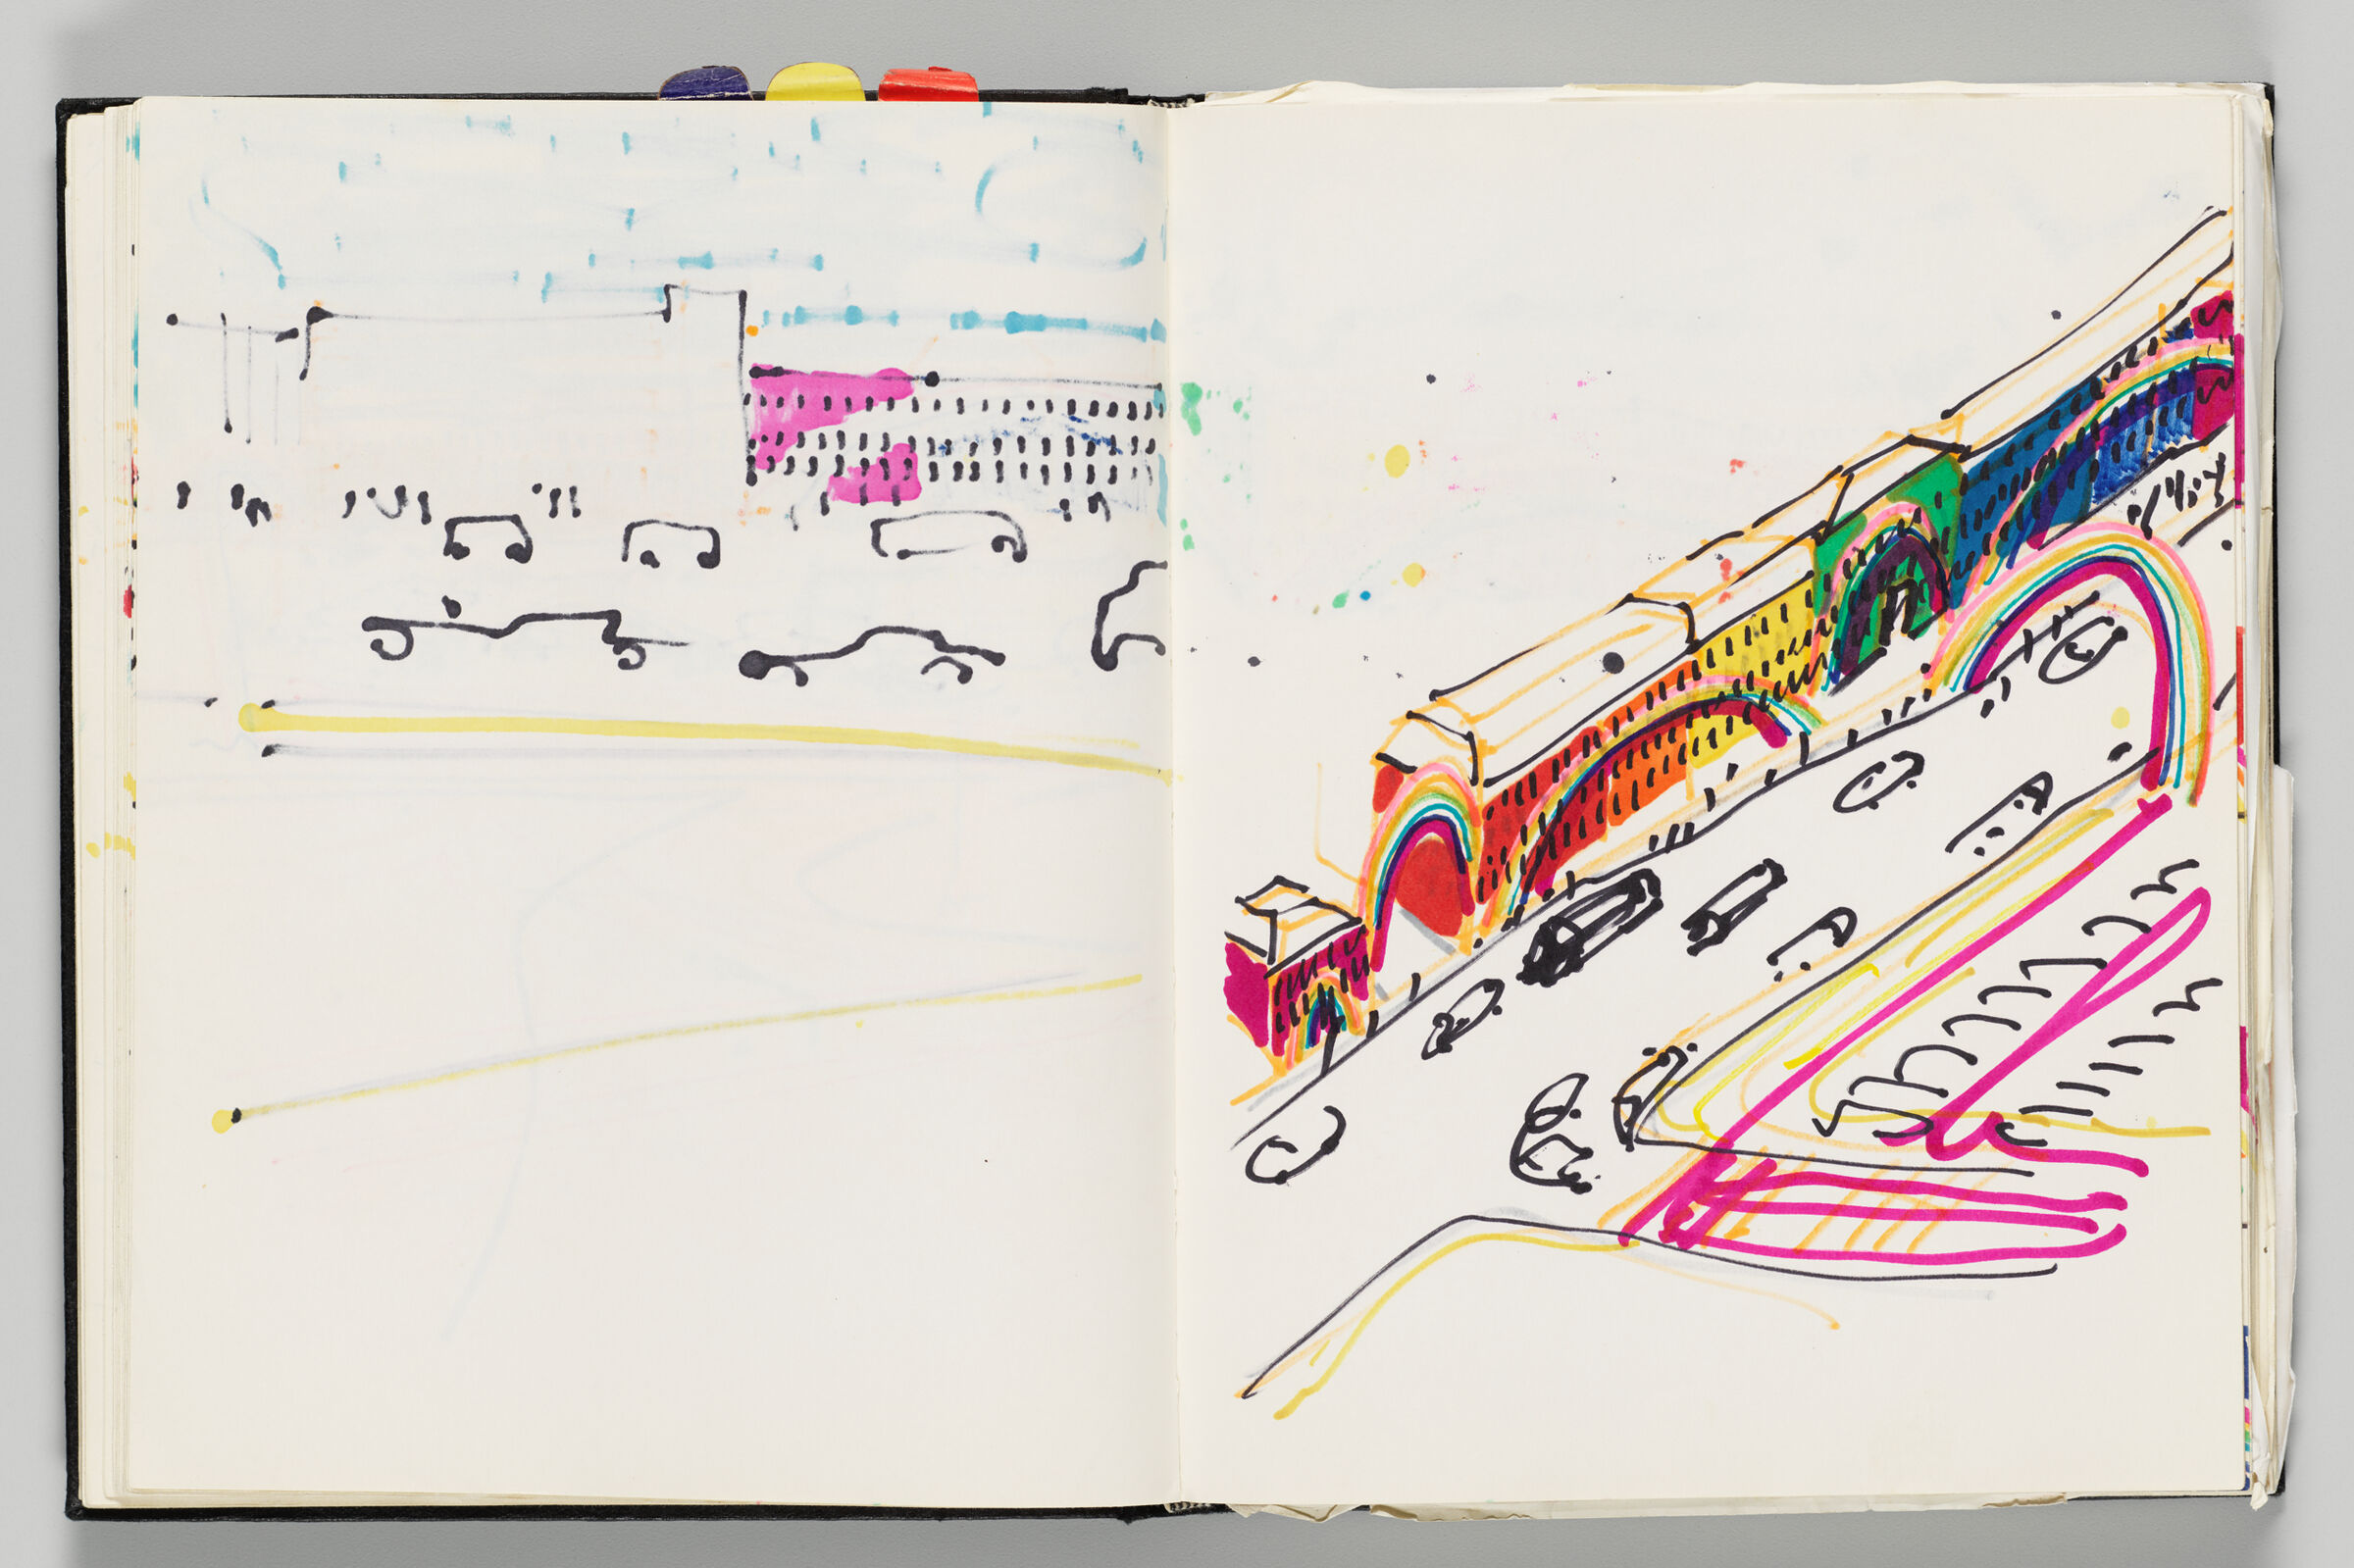 Untitled (Bleed-Through Of Previous Page, Left Page); Untitled (Rainbow Mural Design, Right Page)